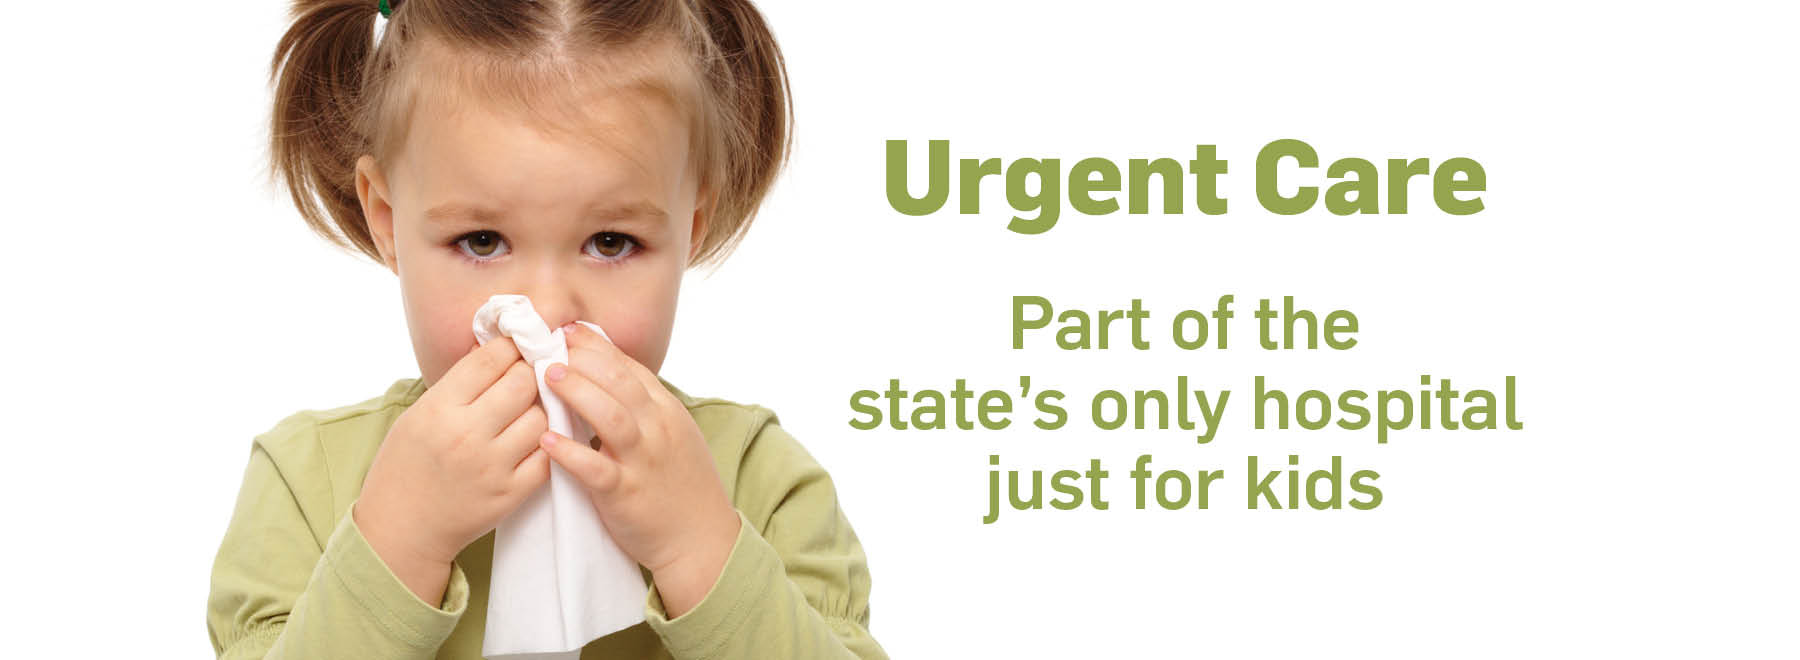 A girl in a green shirt is blowing her nose and next to her is text that says Urgent Care - part of the state's only hospital just for kids